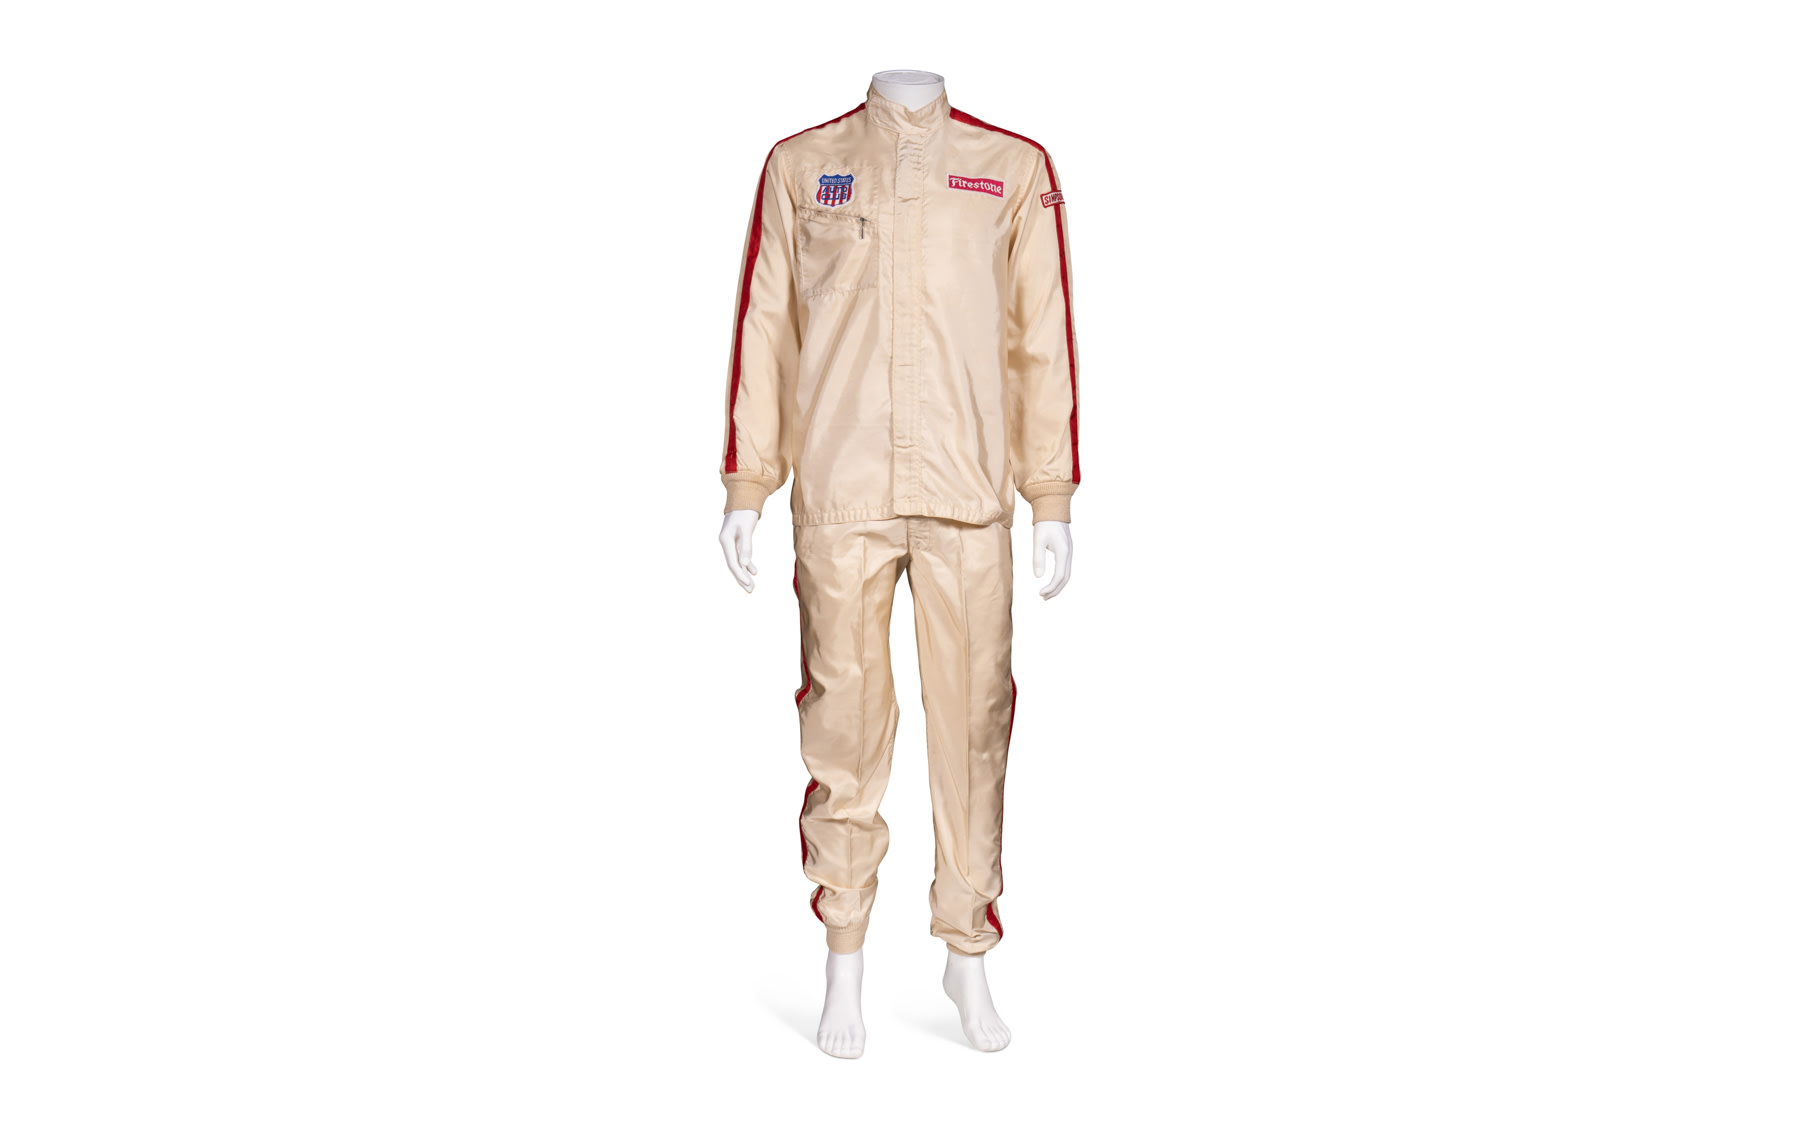 Simpson Two-Piece Driving Suit, Autographed by Jacky Ickx 